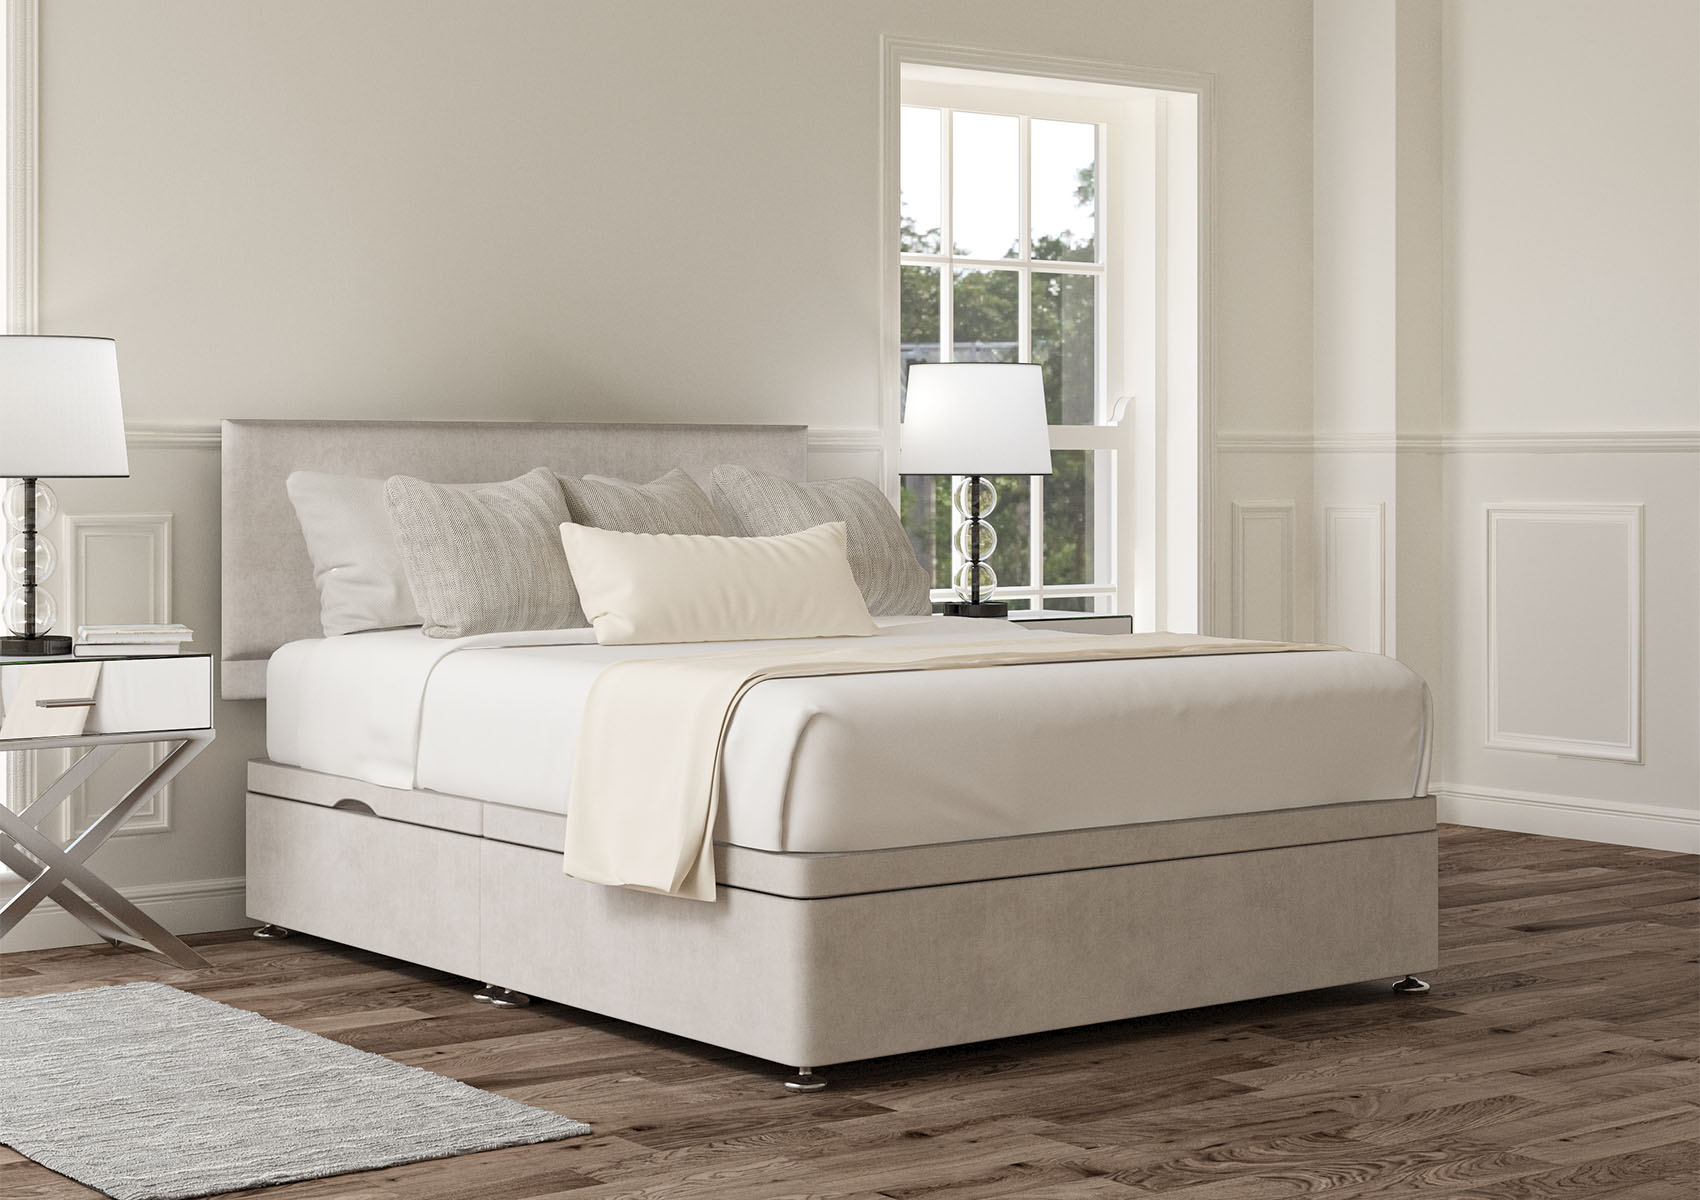 View Henley Naples Cream Upholstered Single Ottoman Bed Time4Sleep information